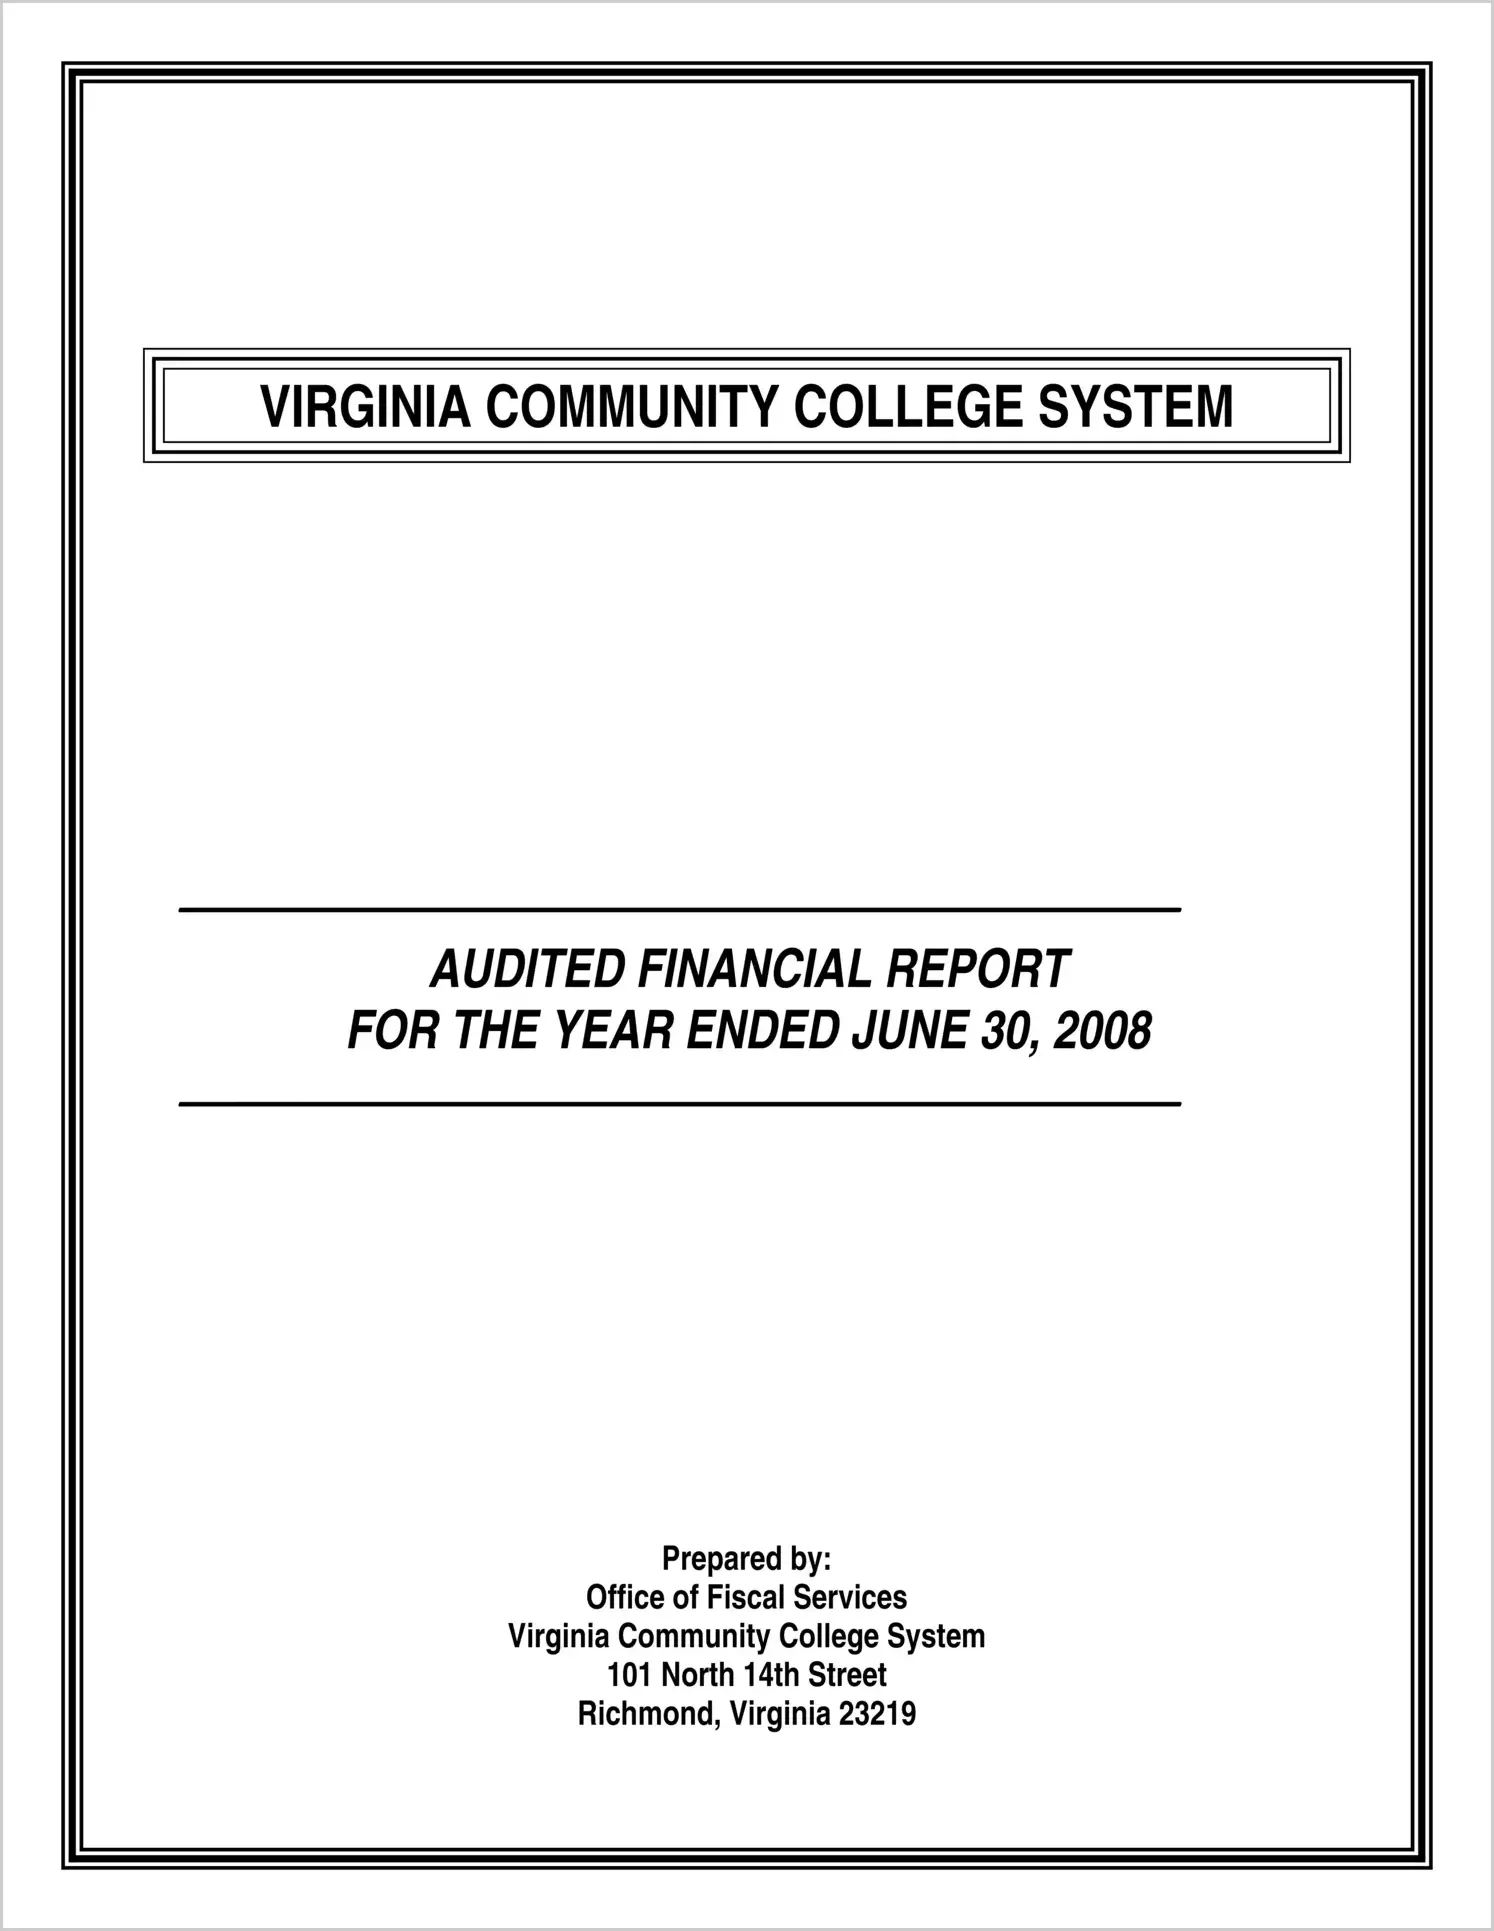 Virginia Community College System Financial Statement Opinion for the year ended June 30, 2008